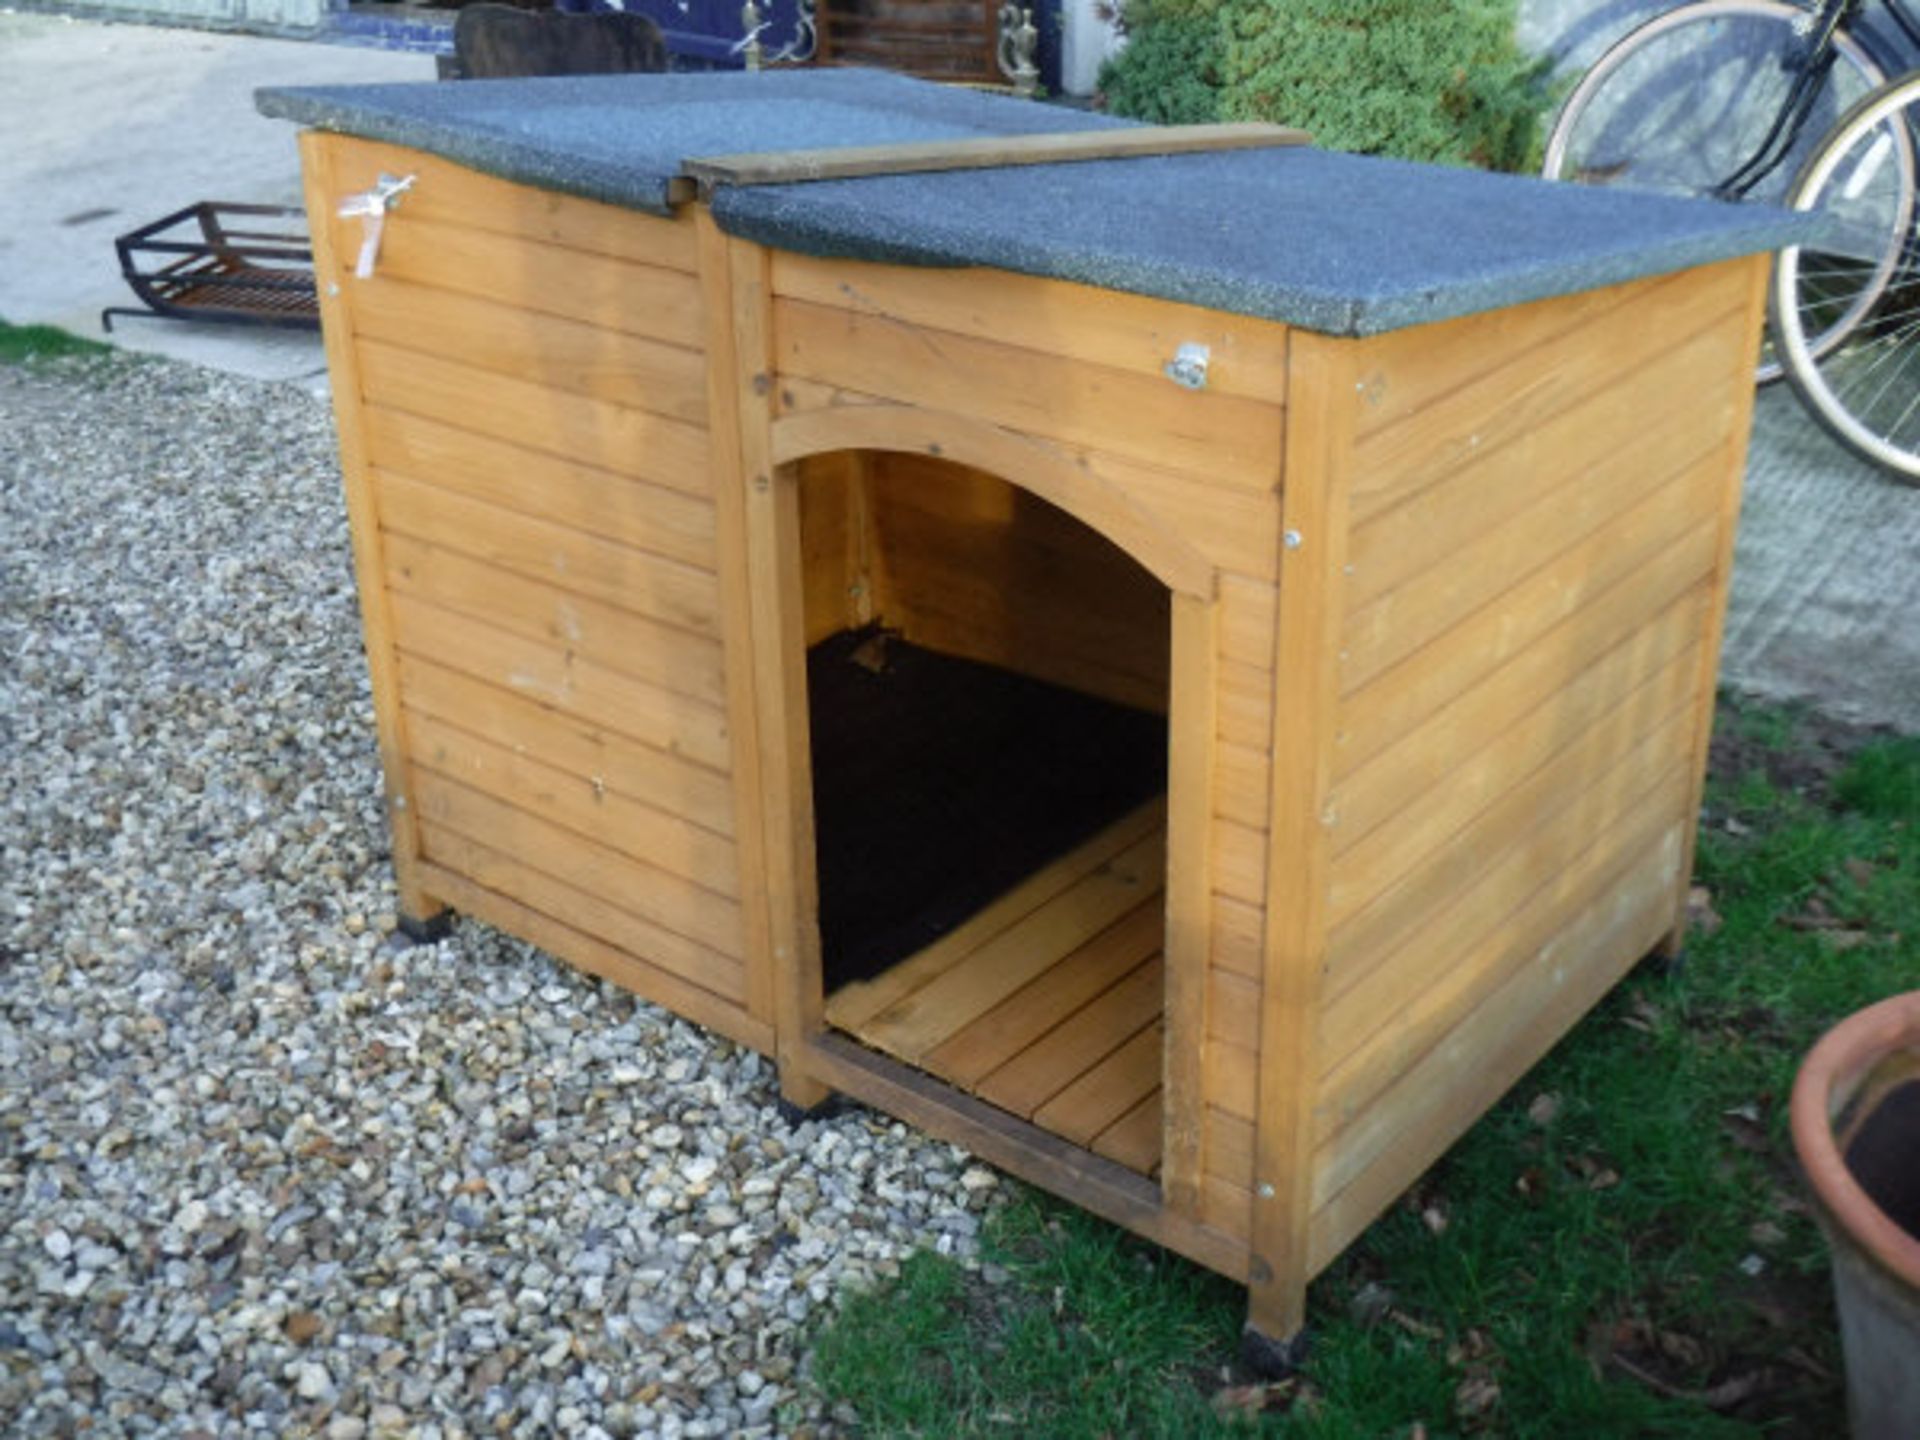 A wooden dog kennel